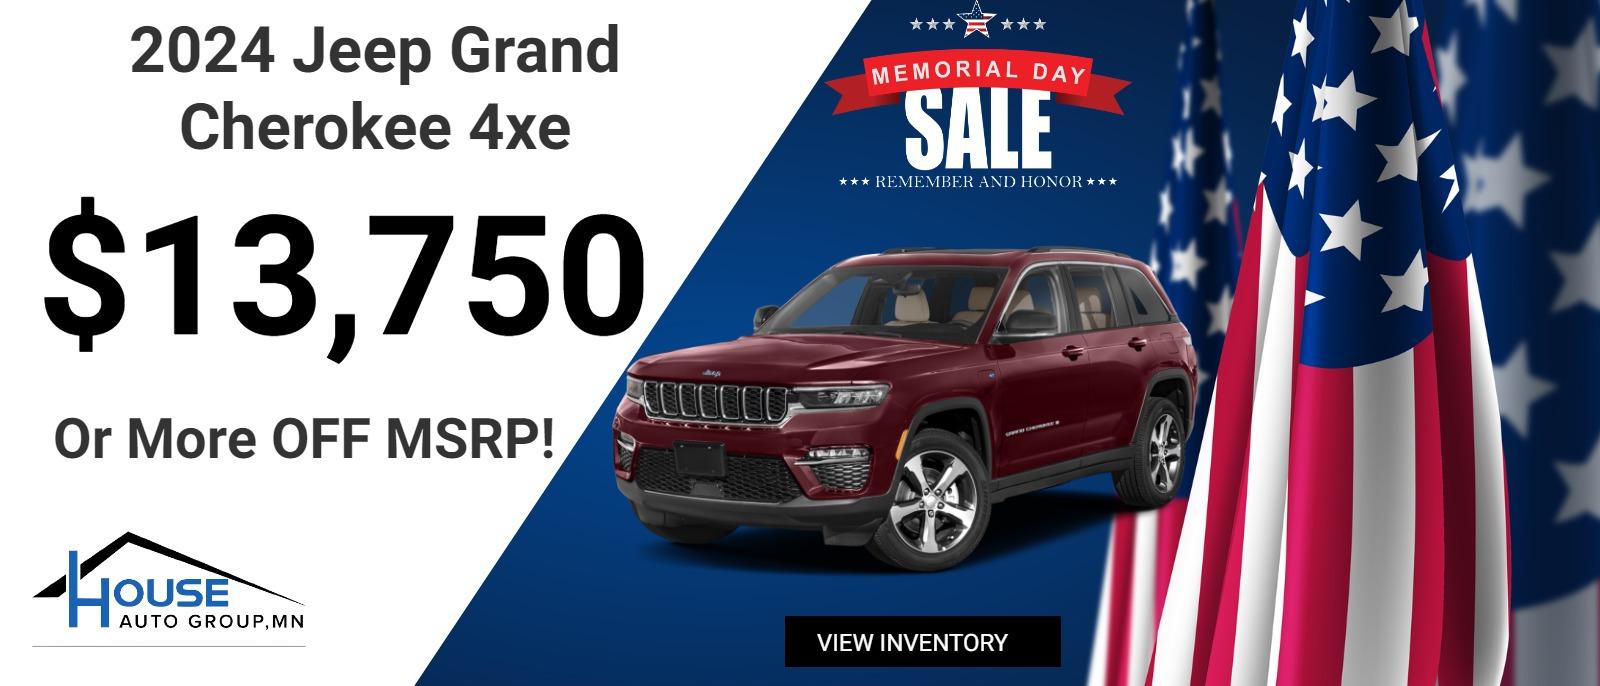 2024 Jeep Grand Cherokee 4xe -- $13,750 Or More Off MSRP!